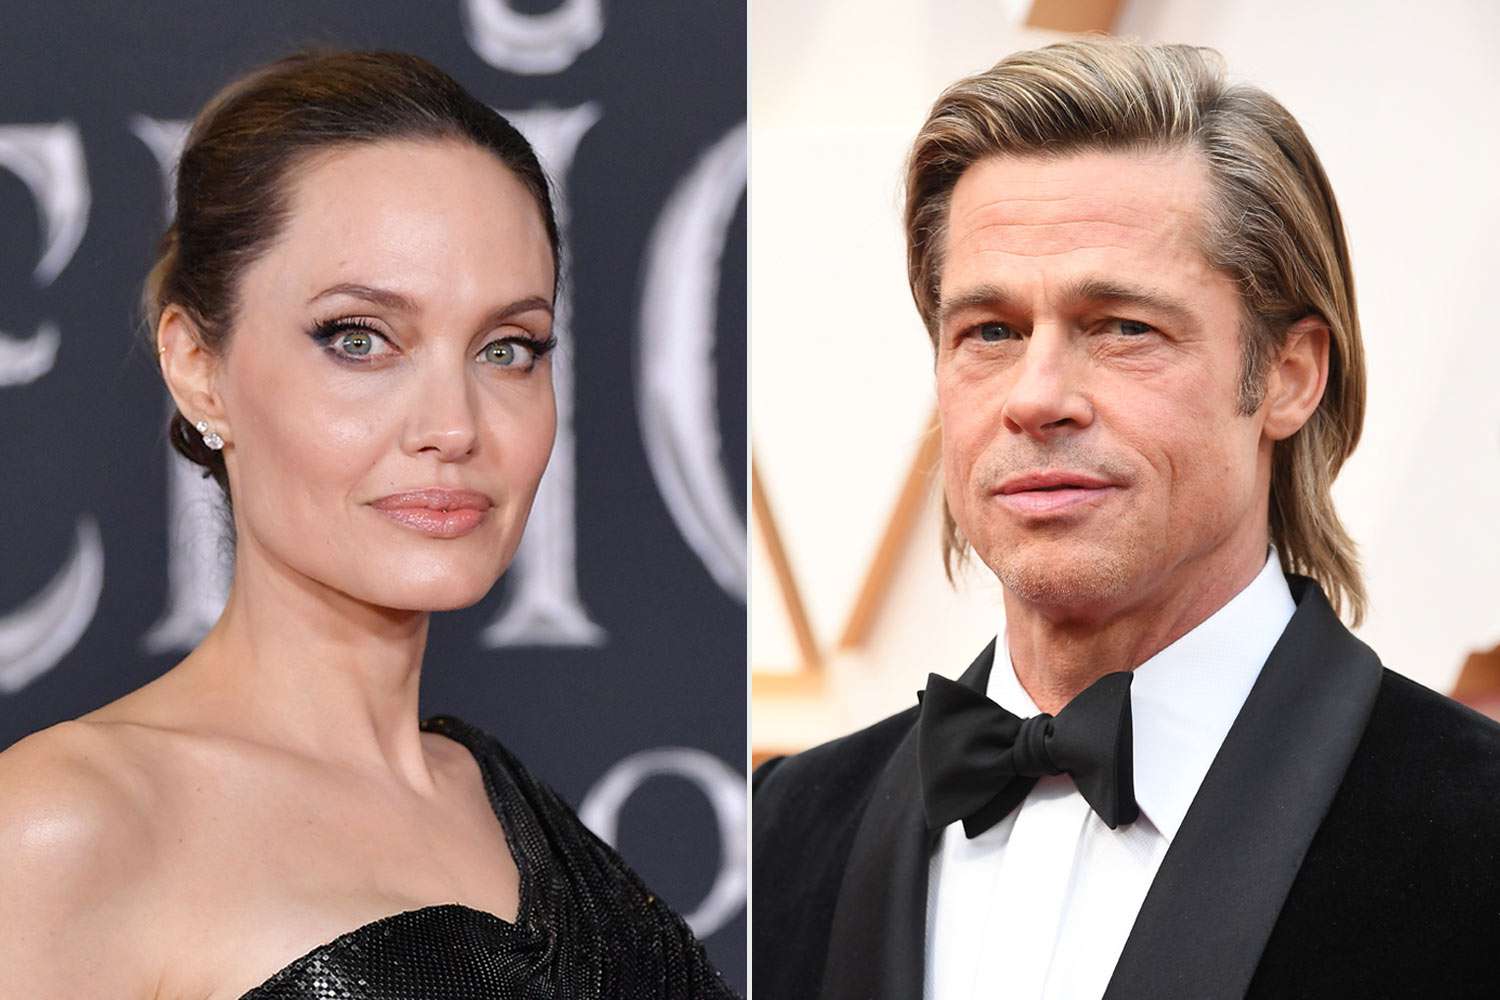 Angelina Jolie asks Brad Pitt to 'stop the fighting' and drop winery lawsuit